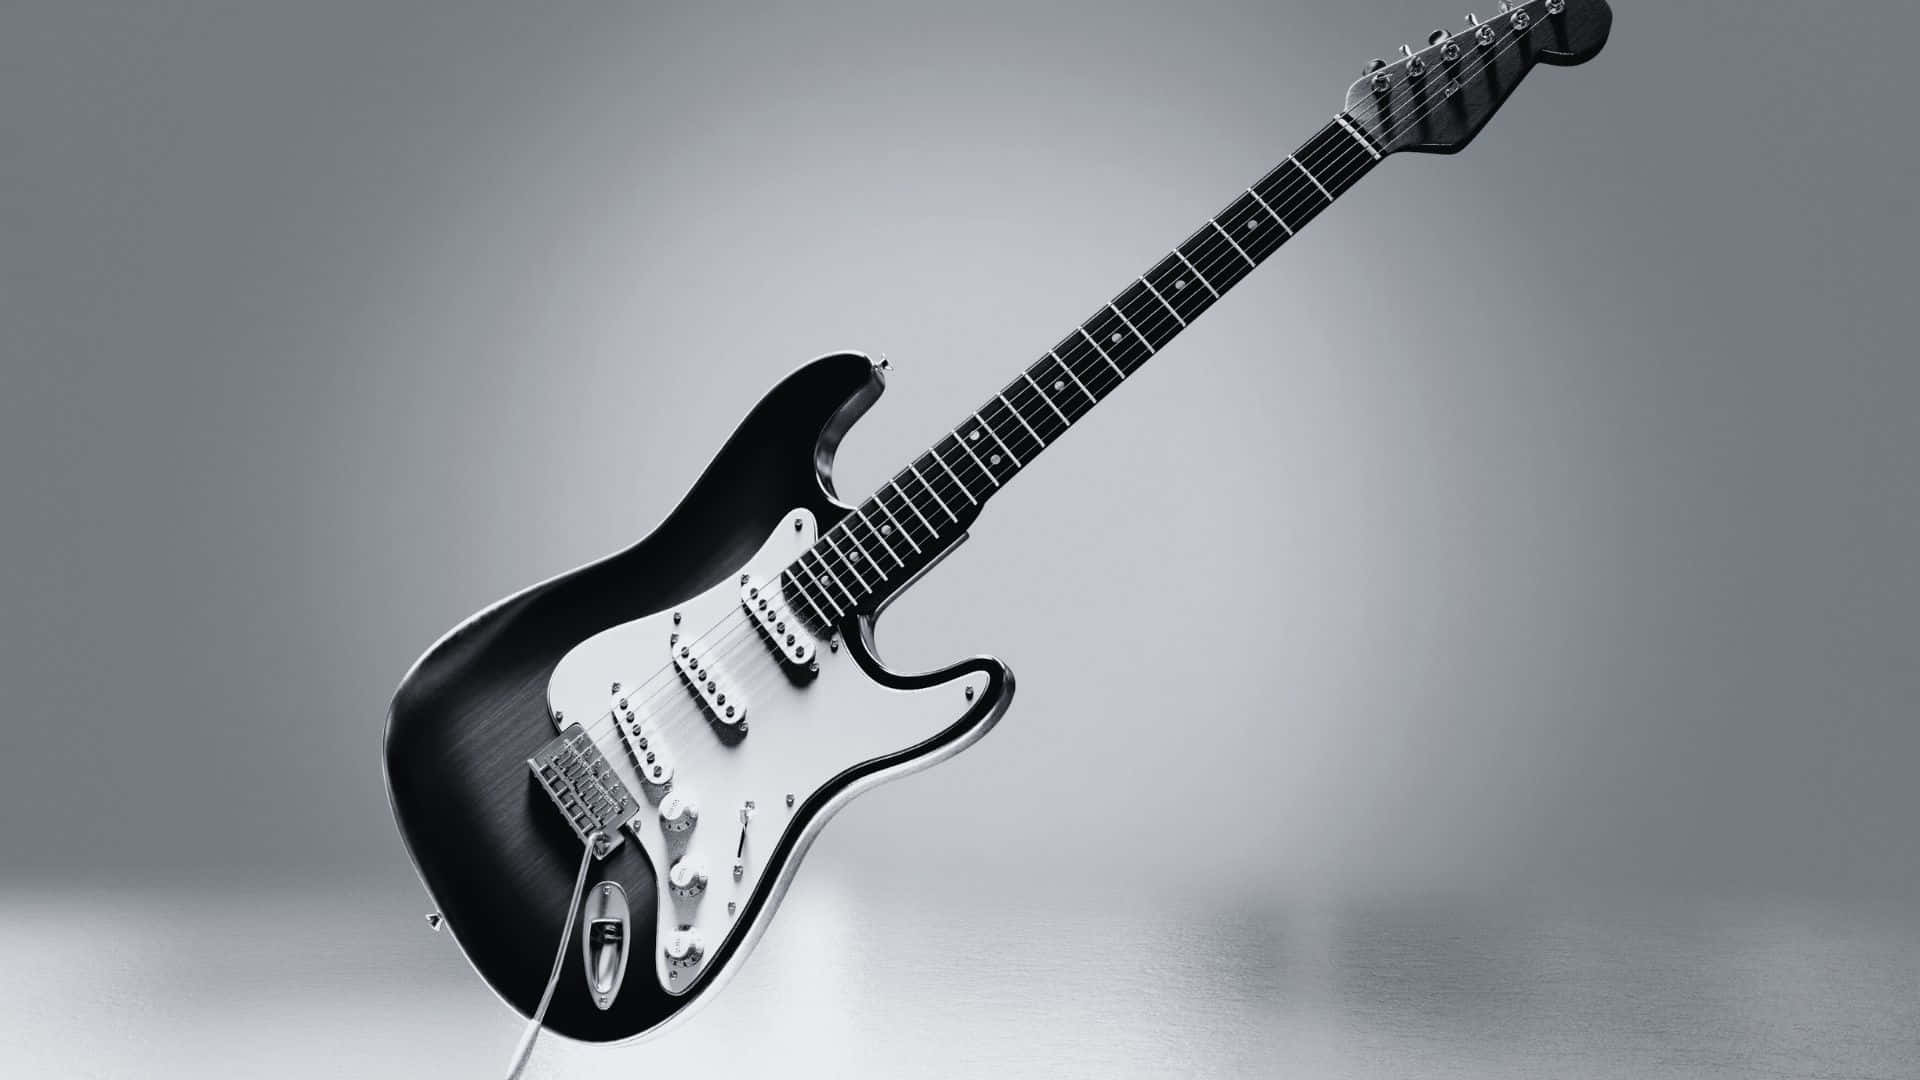 [100+] Black And White Guitar Wallpapers | Wallpapers.com